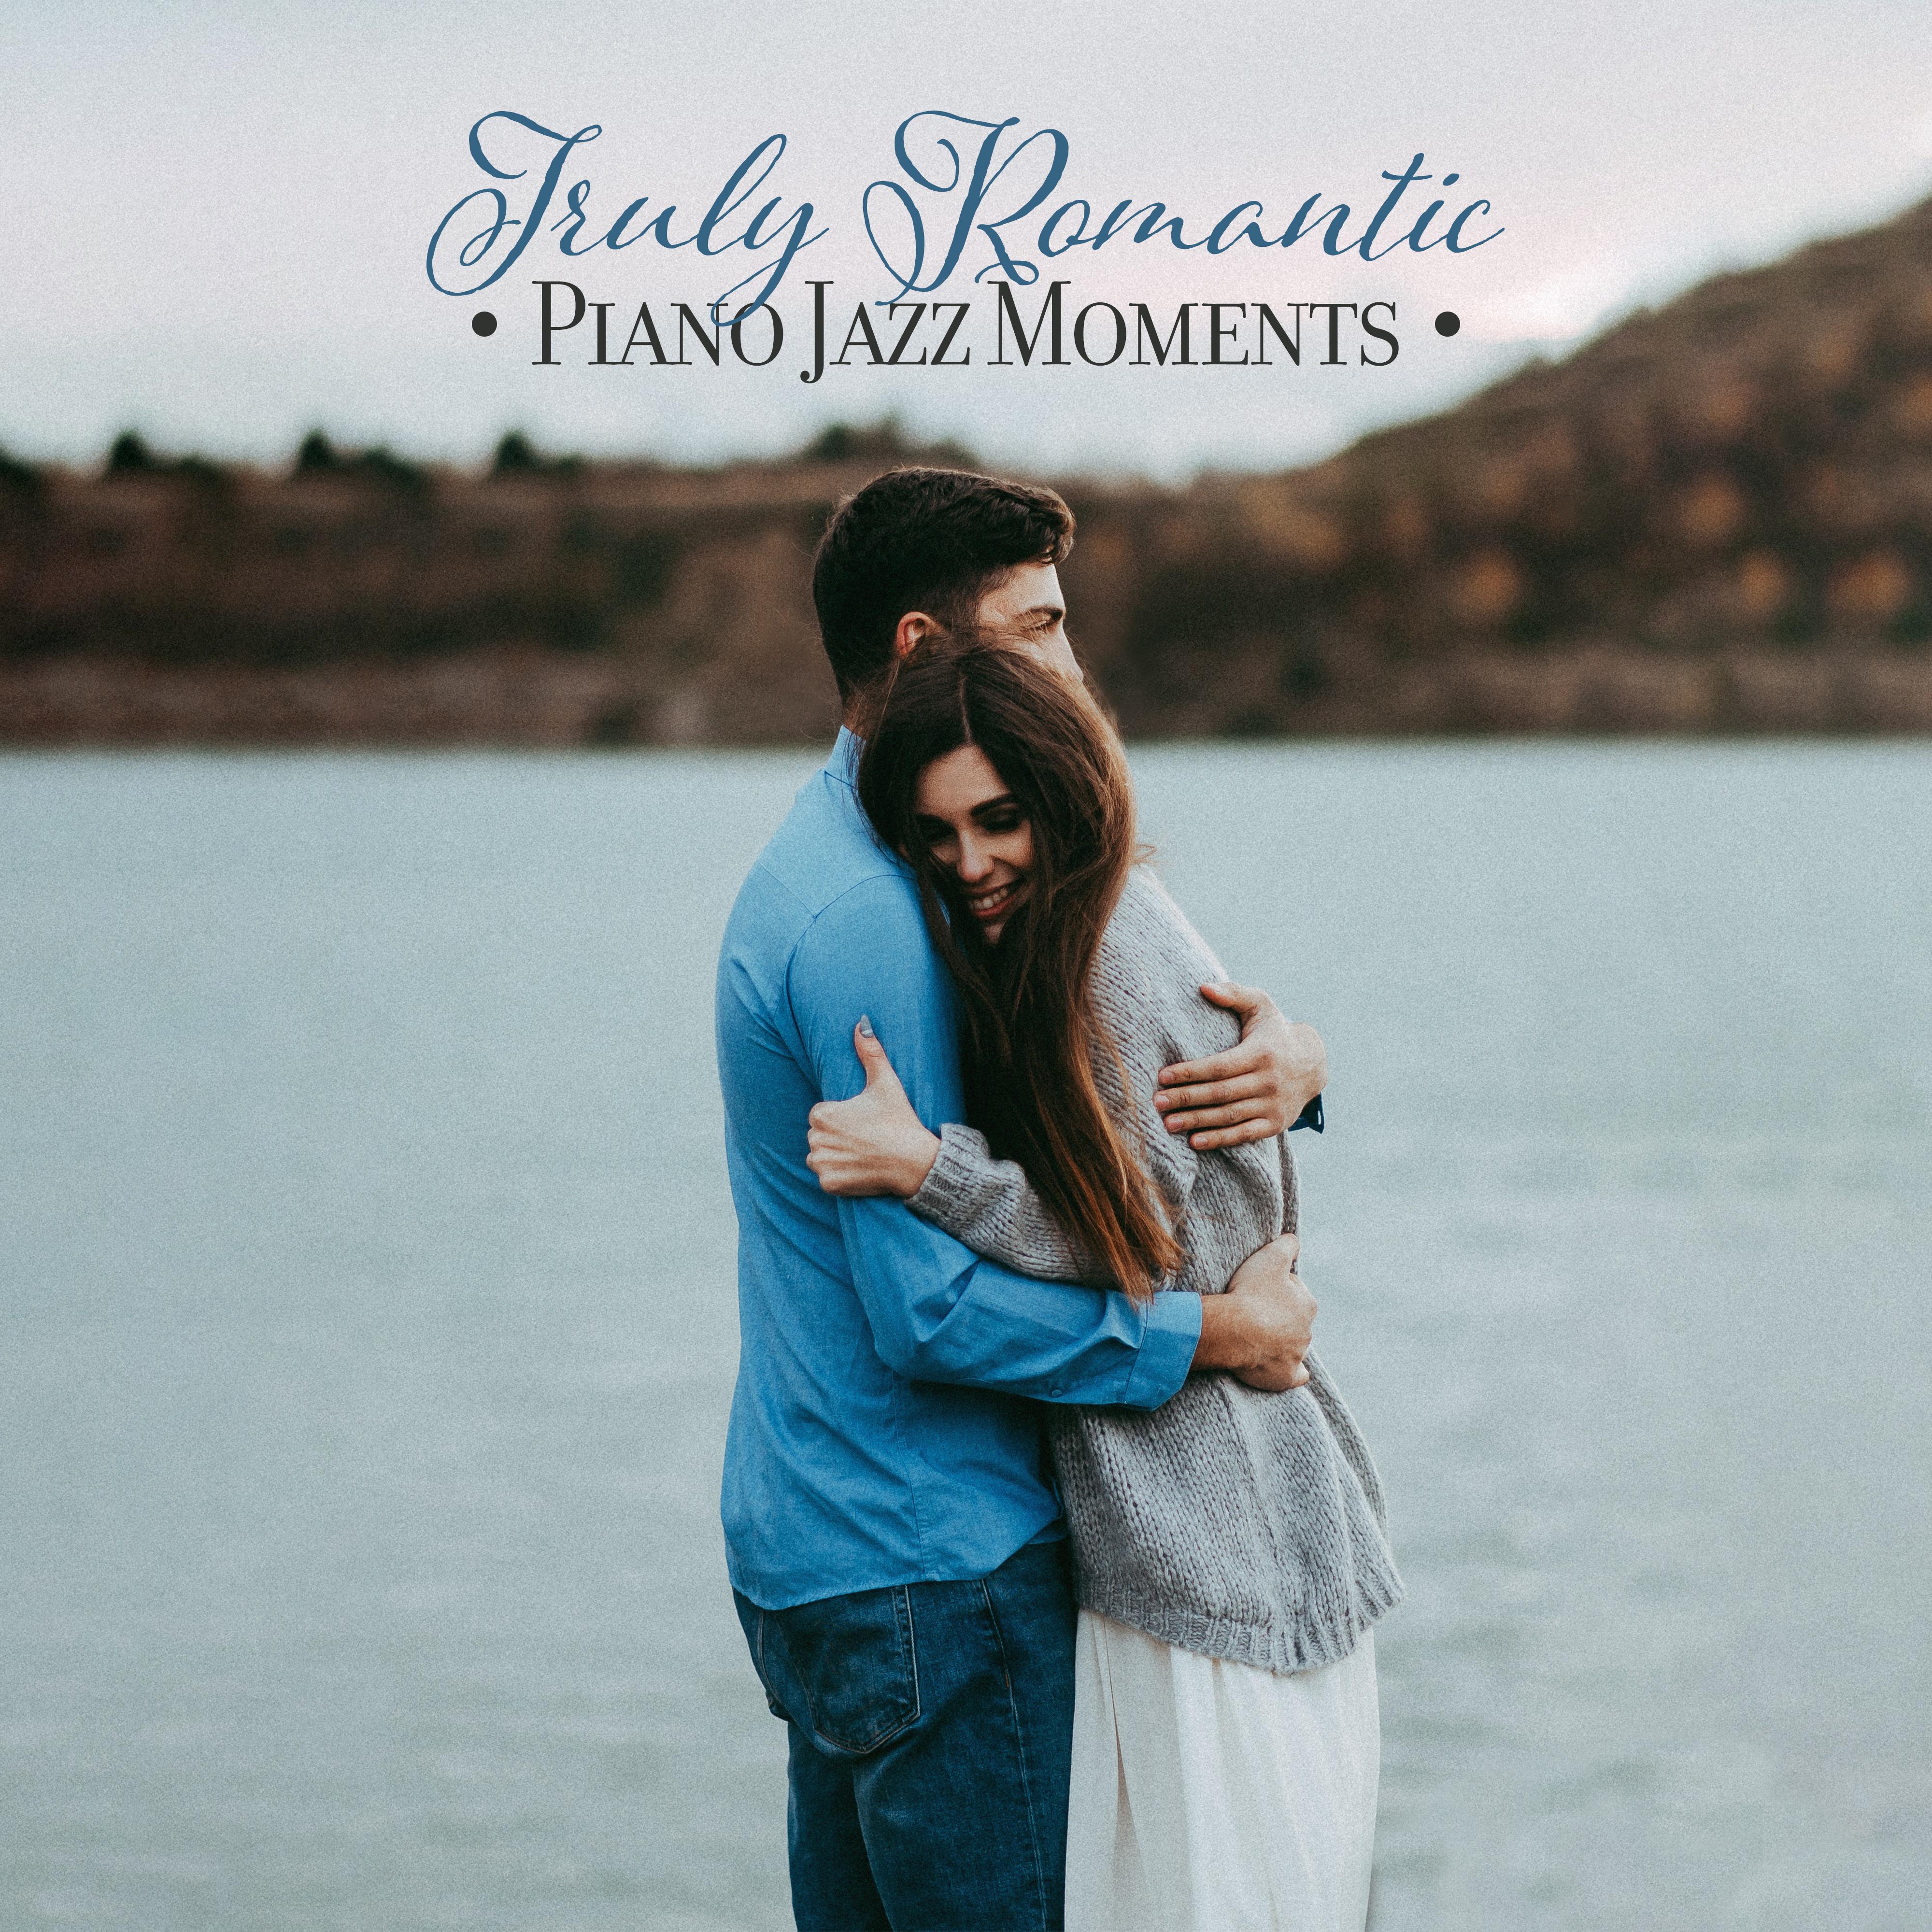 Truly Romantic Piano Jazz Moments: 2019 Fresh Instrumental Piano Music Composed for Romantic Time, Perfect Songs for Dinner with Love & Spending Some Intimate Moments